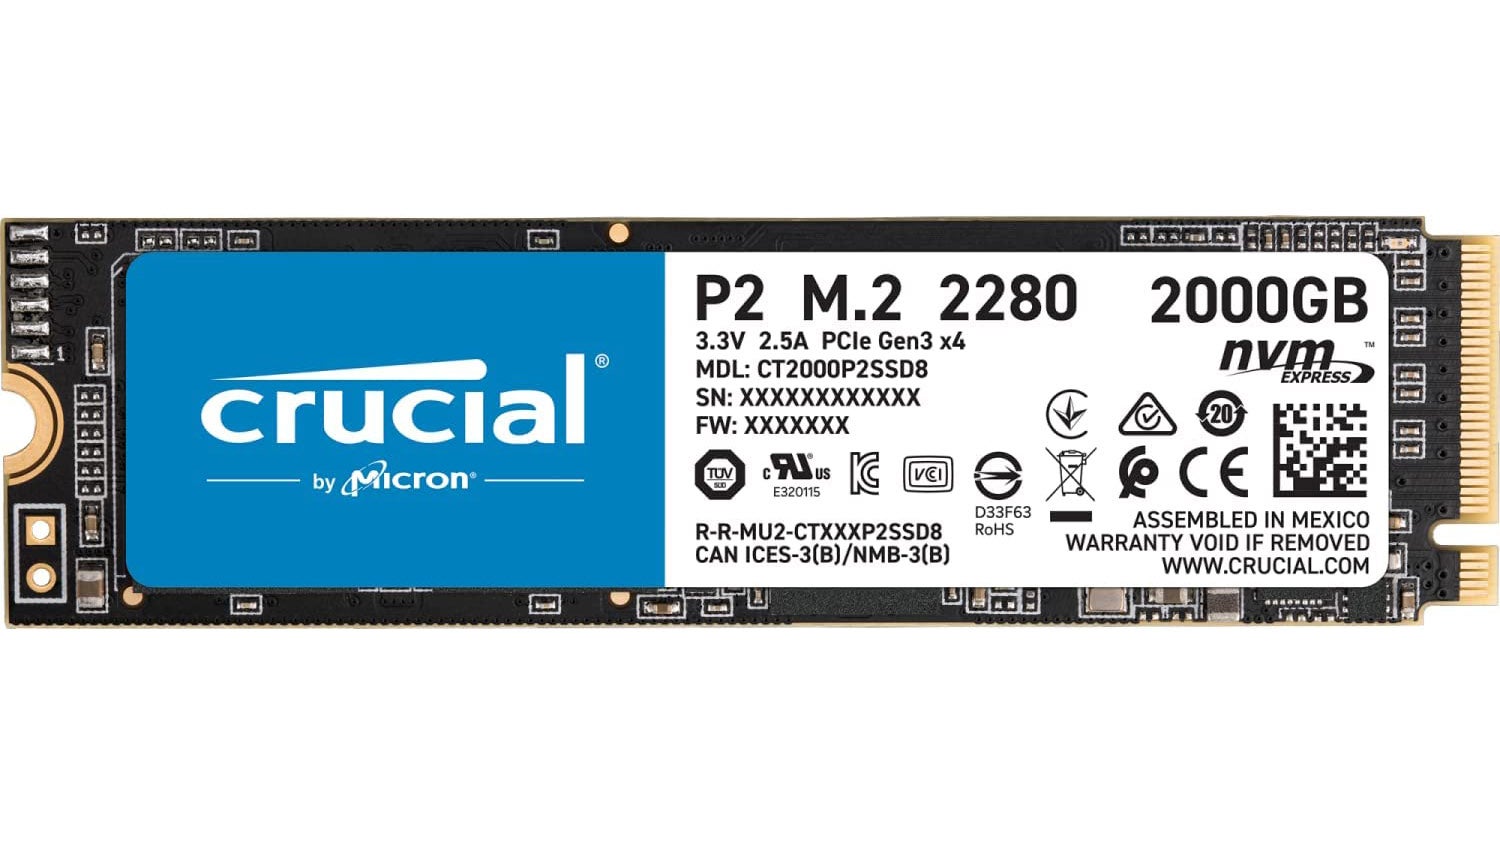 The cheap and cheerful Crucial P2 NVMe drive is especially cheap